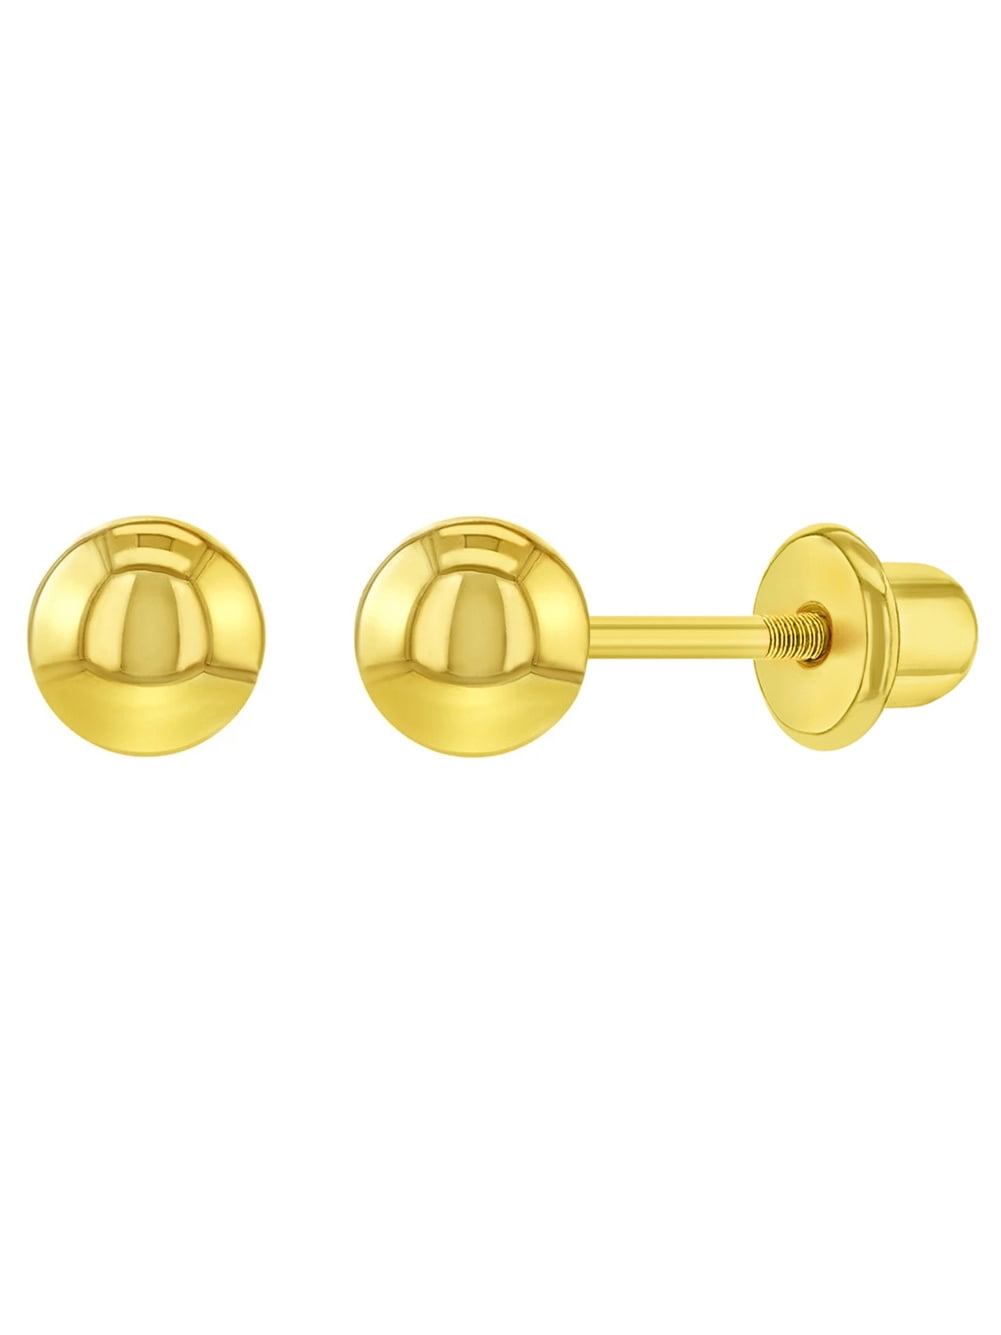 Extra 14K Yellow Gold Screw Back Children's Earring Replacement